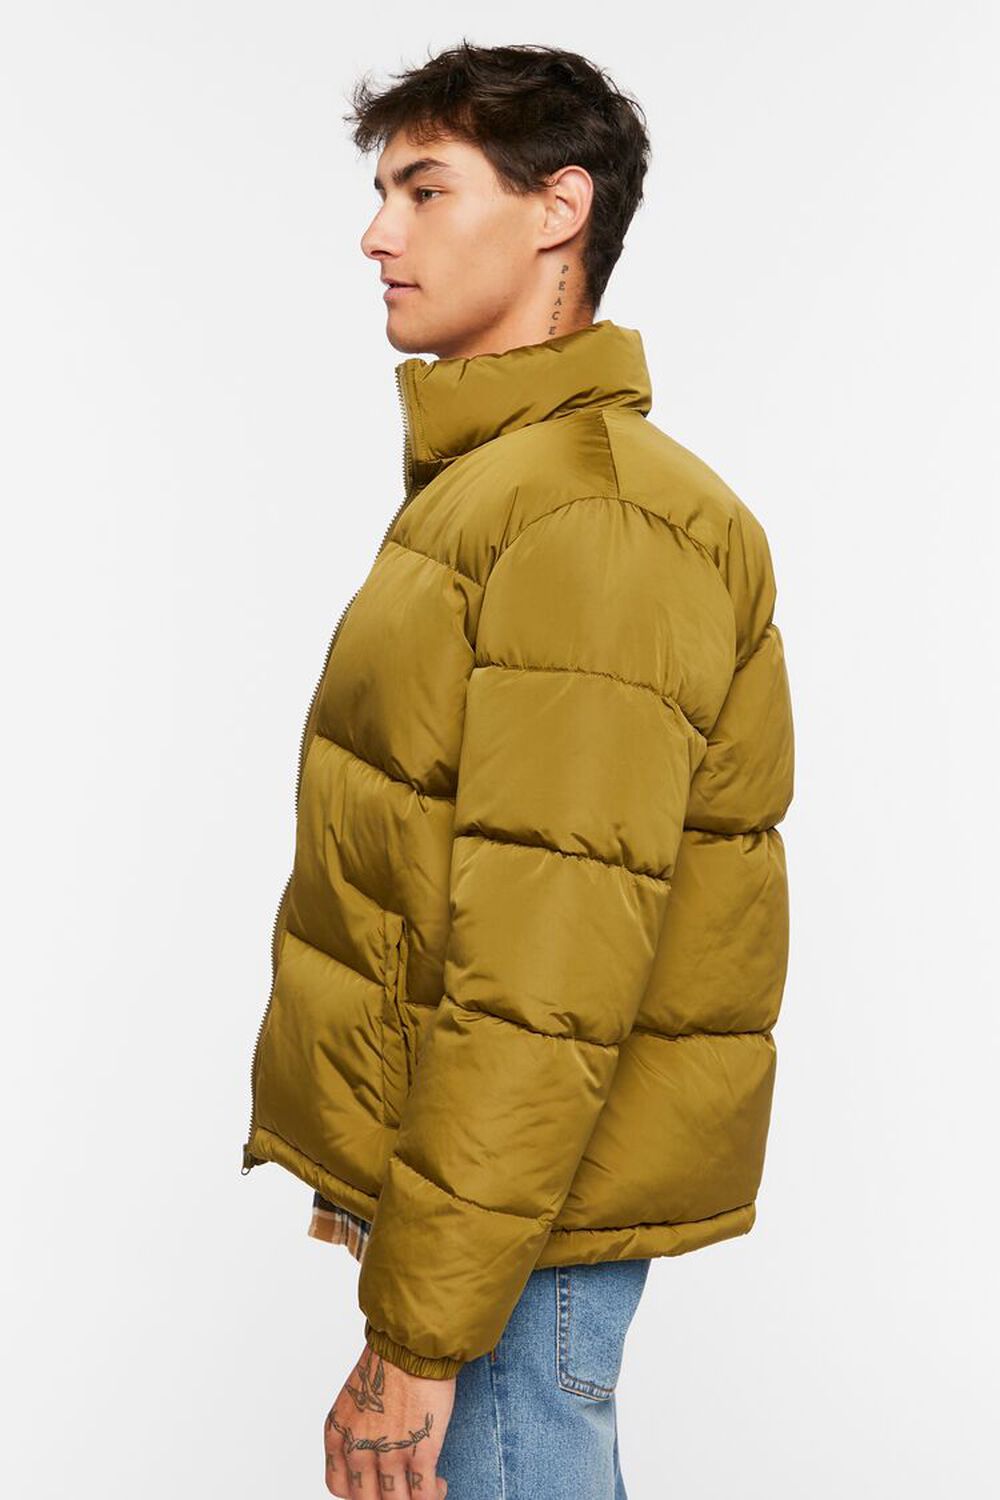 OLIVE Quilted Puffer Jacket, image 2